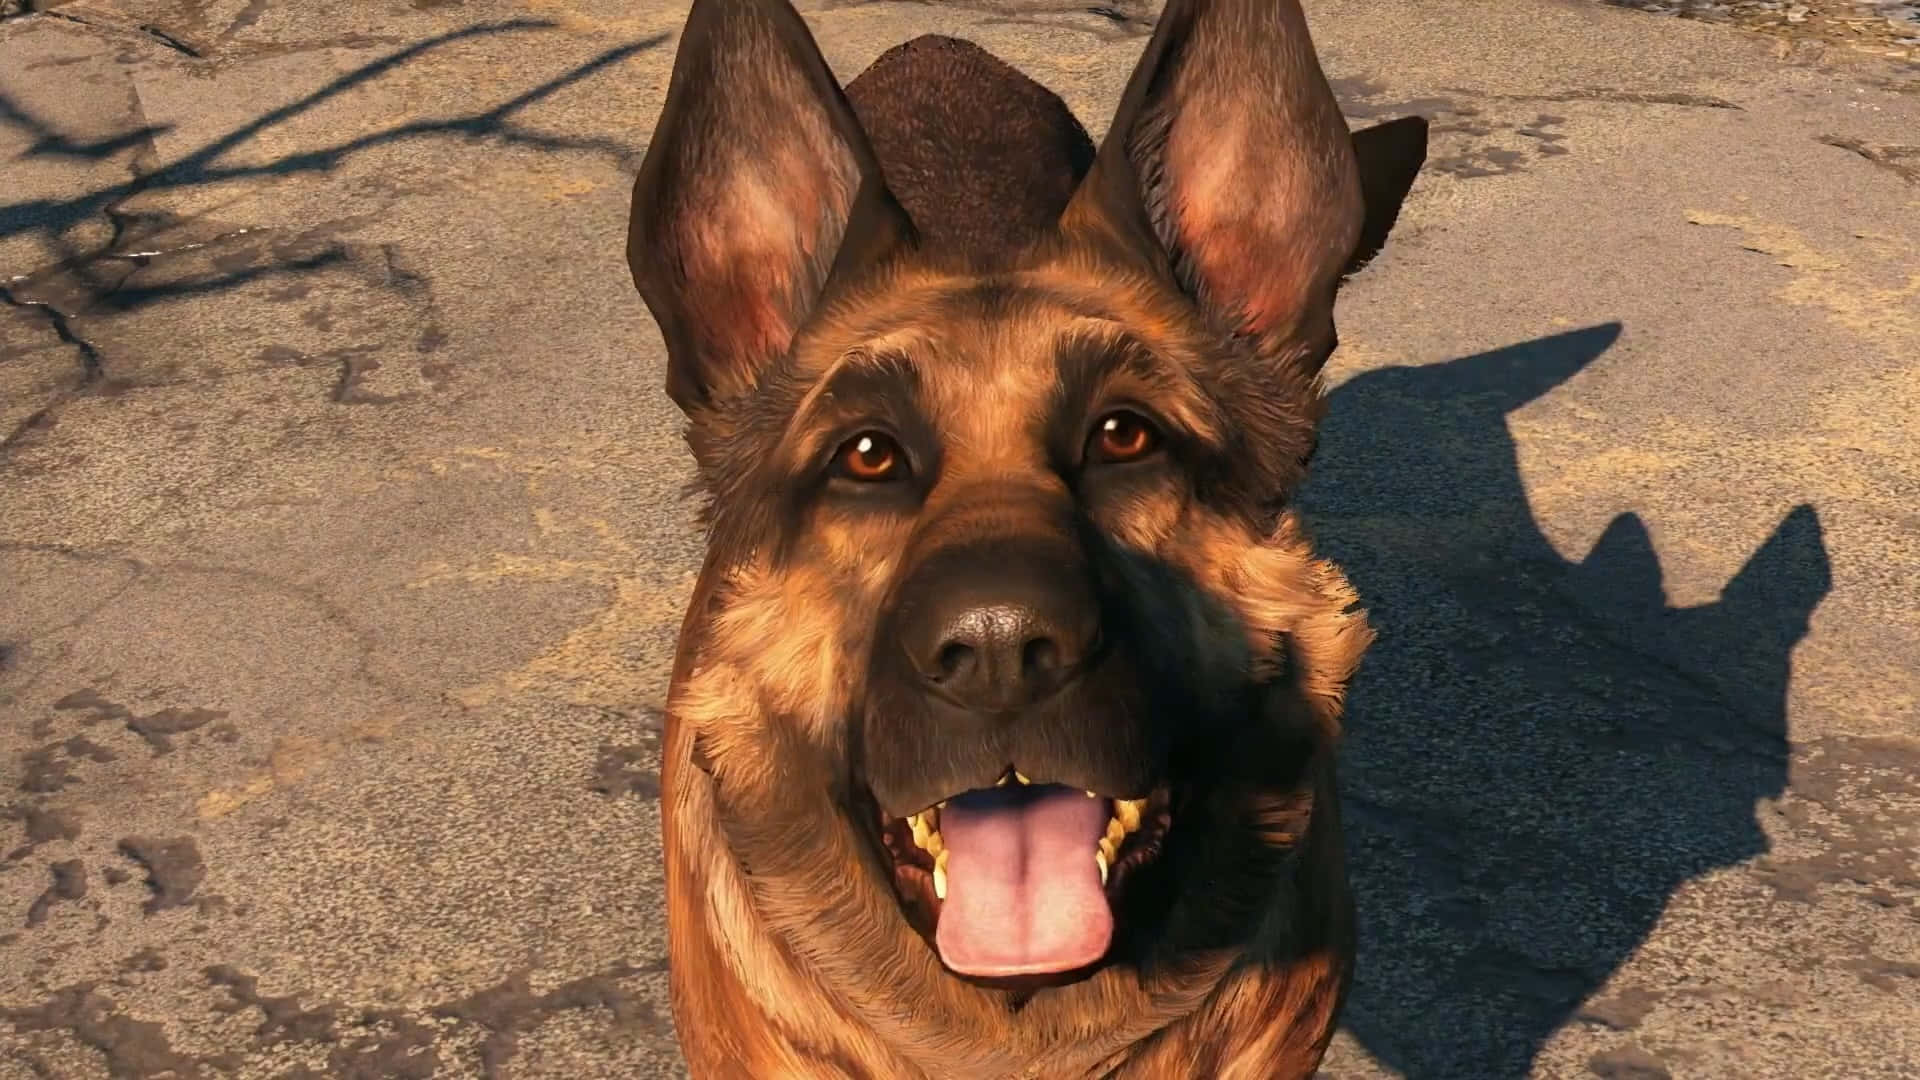 Fallout 4 Dogmeat - Dogmeat exploring the post-apocalyptic wasteland Wallpaper